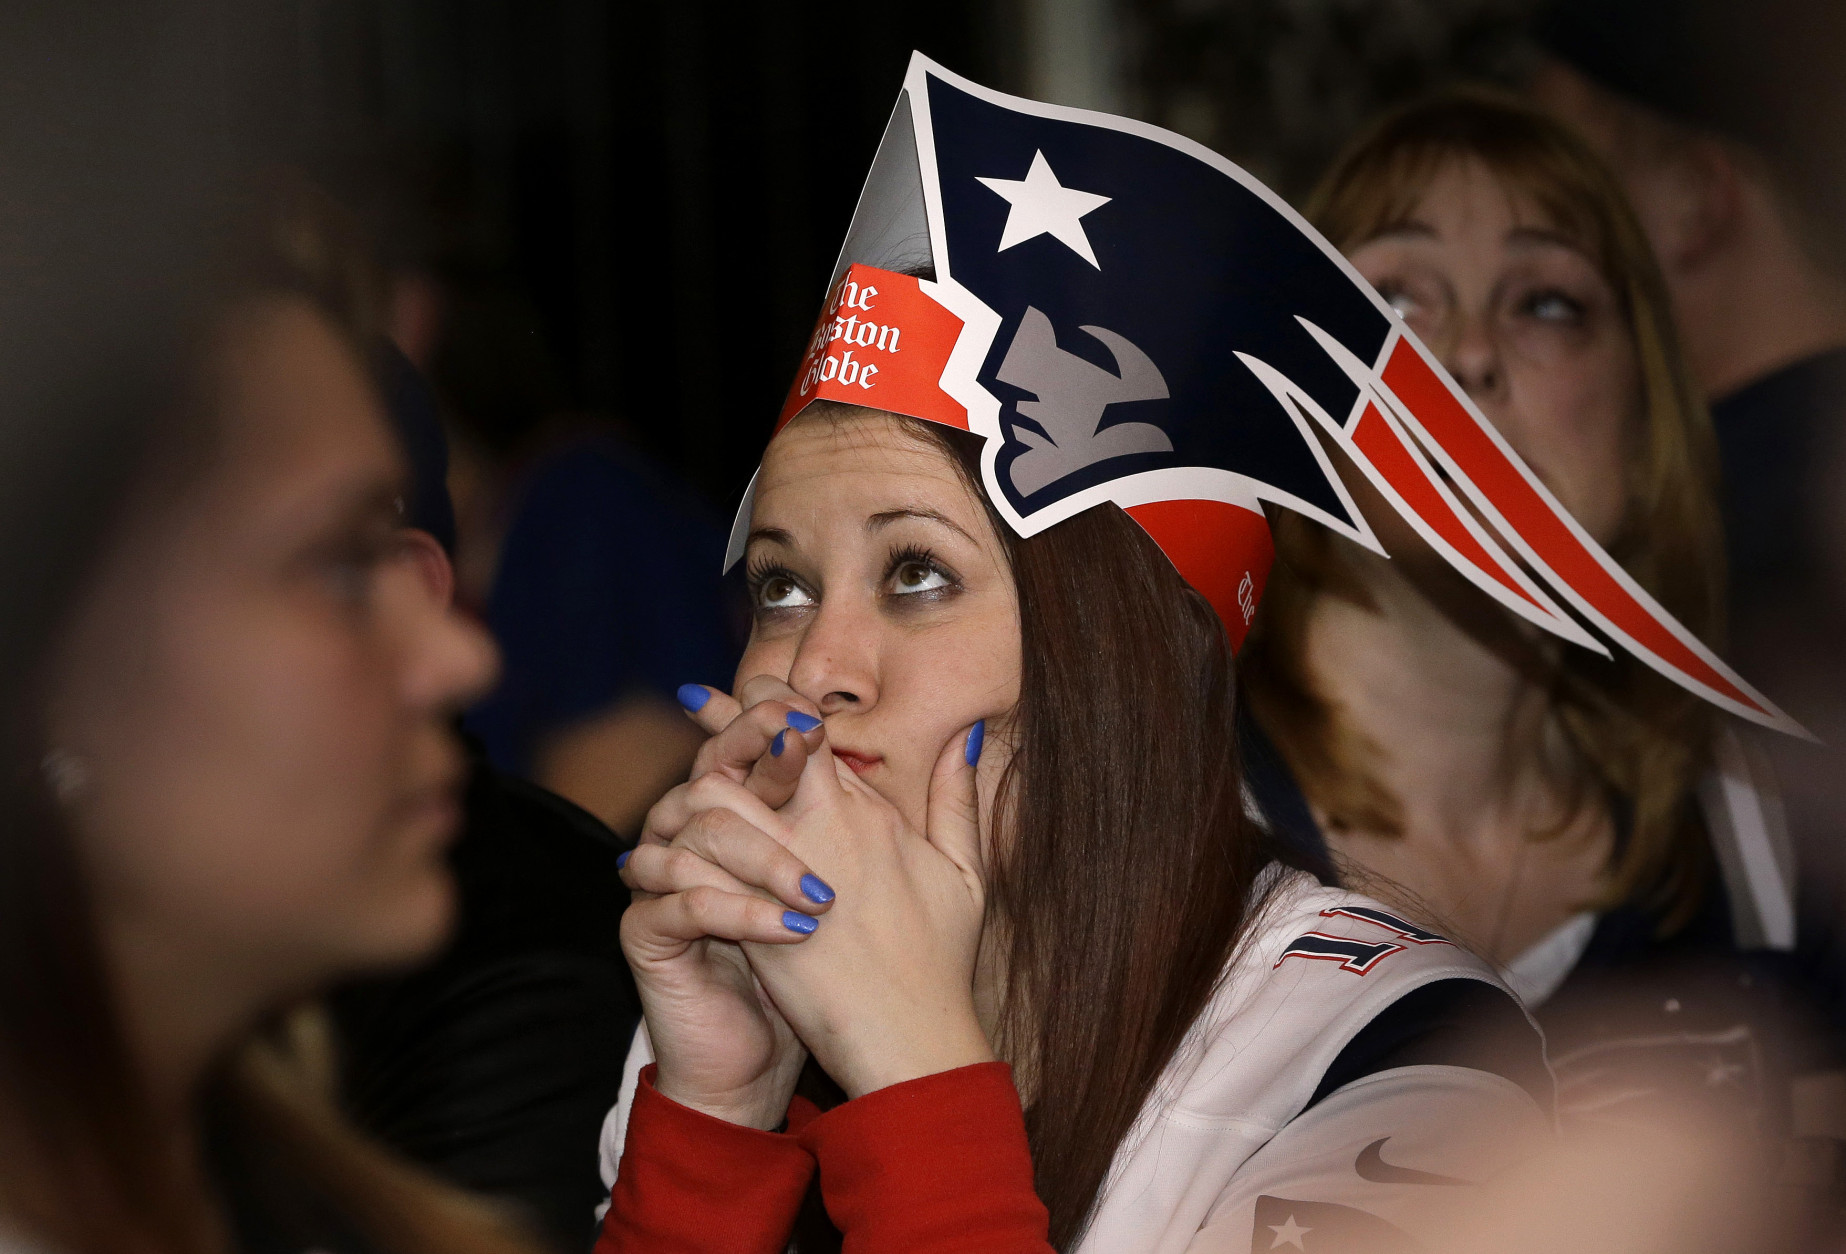 Courtney Lurate, of Boston, watches the New England Patriots play against the Seattle Seahawks in the NFL Super Bowl XLIX football game in Glendale, Ariz., Sunday, Feb. 1, 2015, at a bar in Boston. (AP Photo/Steven Senne)